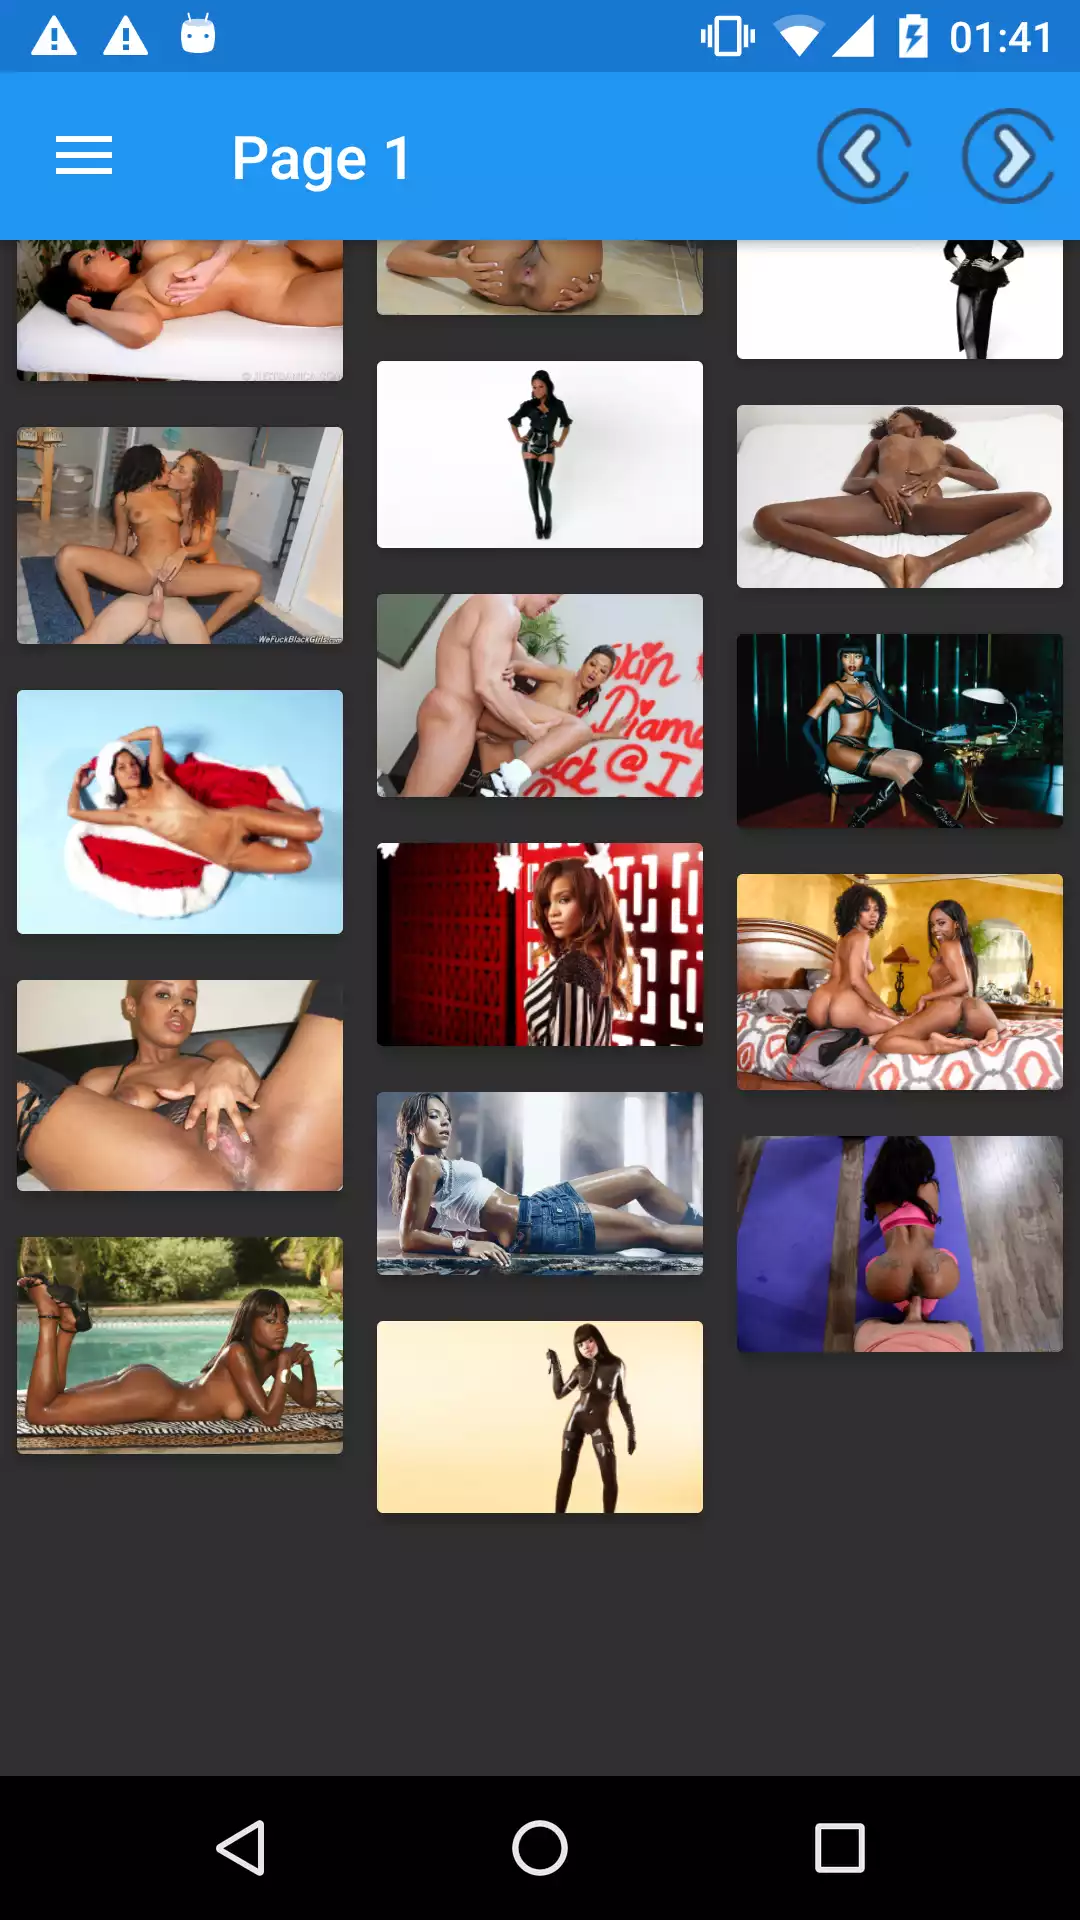 Ebony walls image,galleries,apk,android,manga,viewer,ics,henti,wallpapers,download,pictures,pics,shemale,pic,browser,best,wallpaper,hentai,application,sexy,backgrounds,app,adult